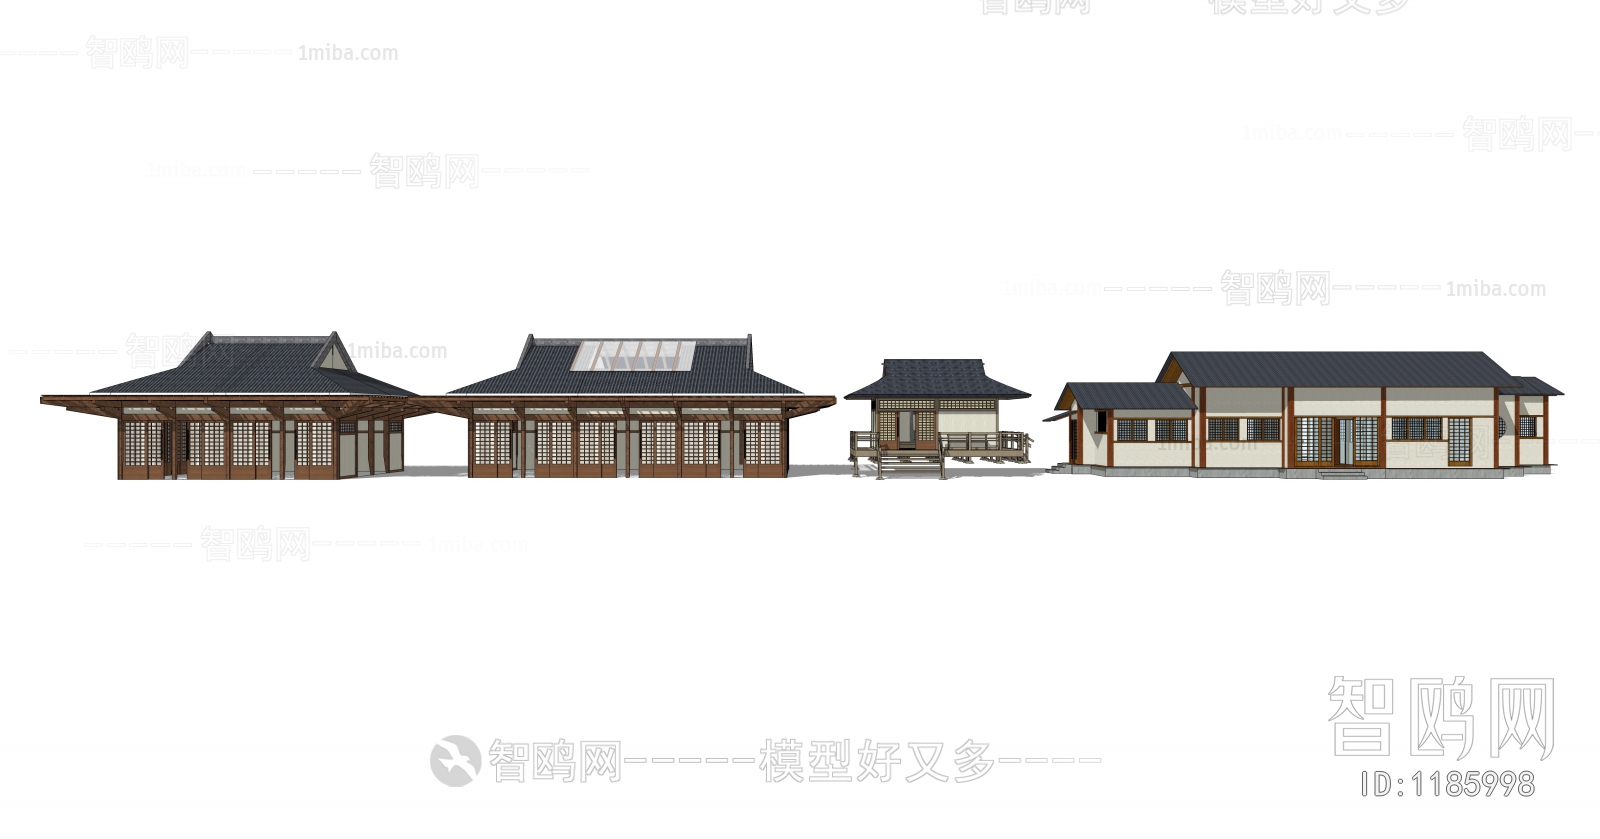 Japanese Style Building Appearance